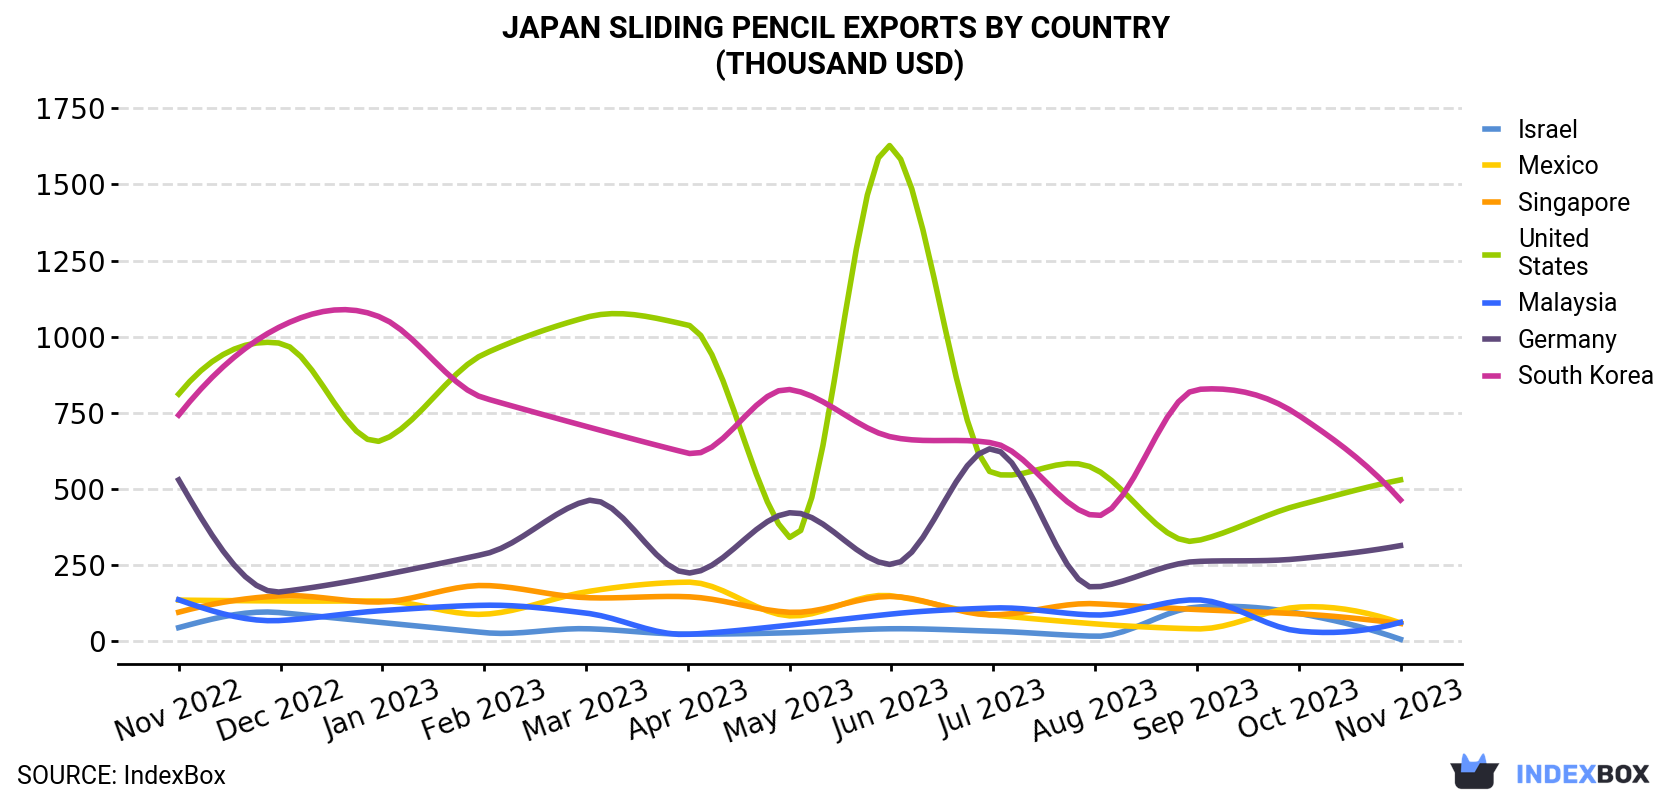 Japan Sliding Pencil Exports By Country (Thousand USD)